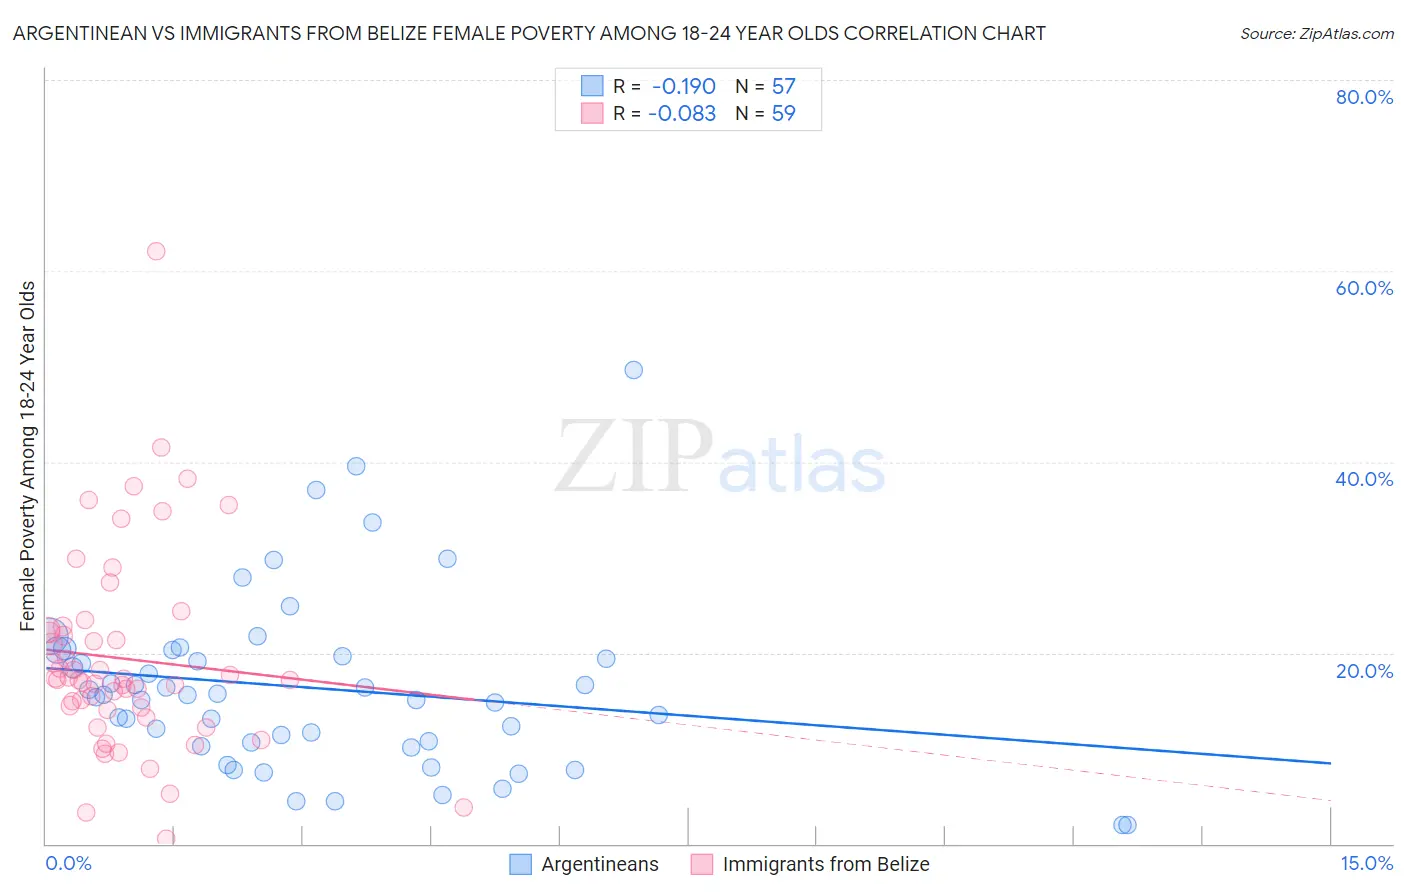 Argentinean vs Immigrants from Belize Female Poverty Among 18-24 Year Olds